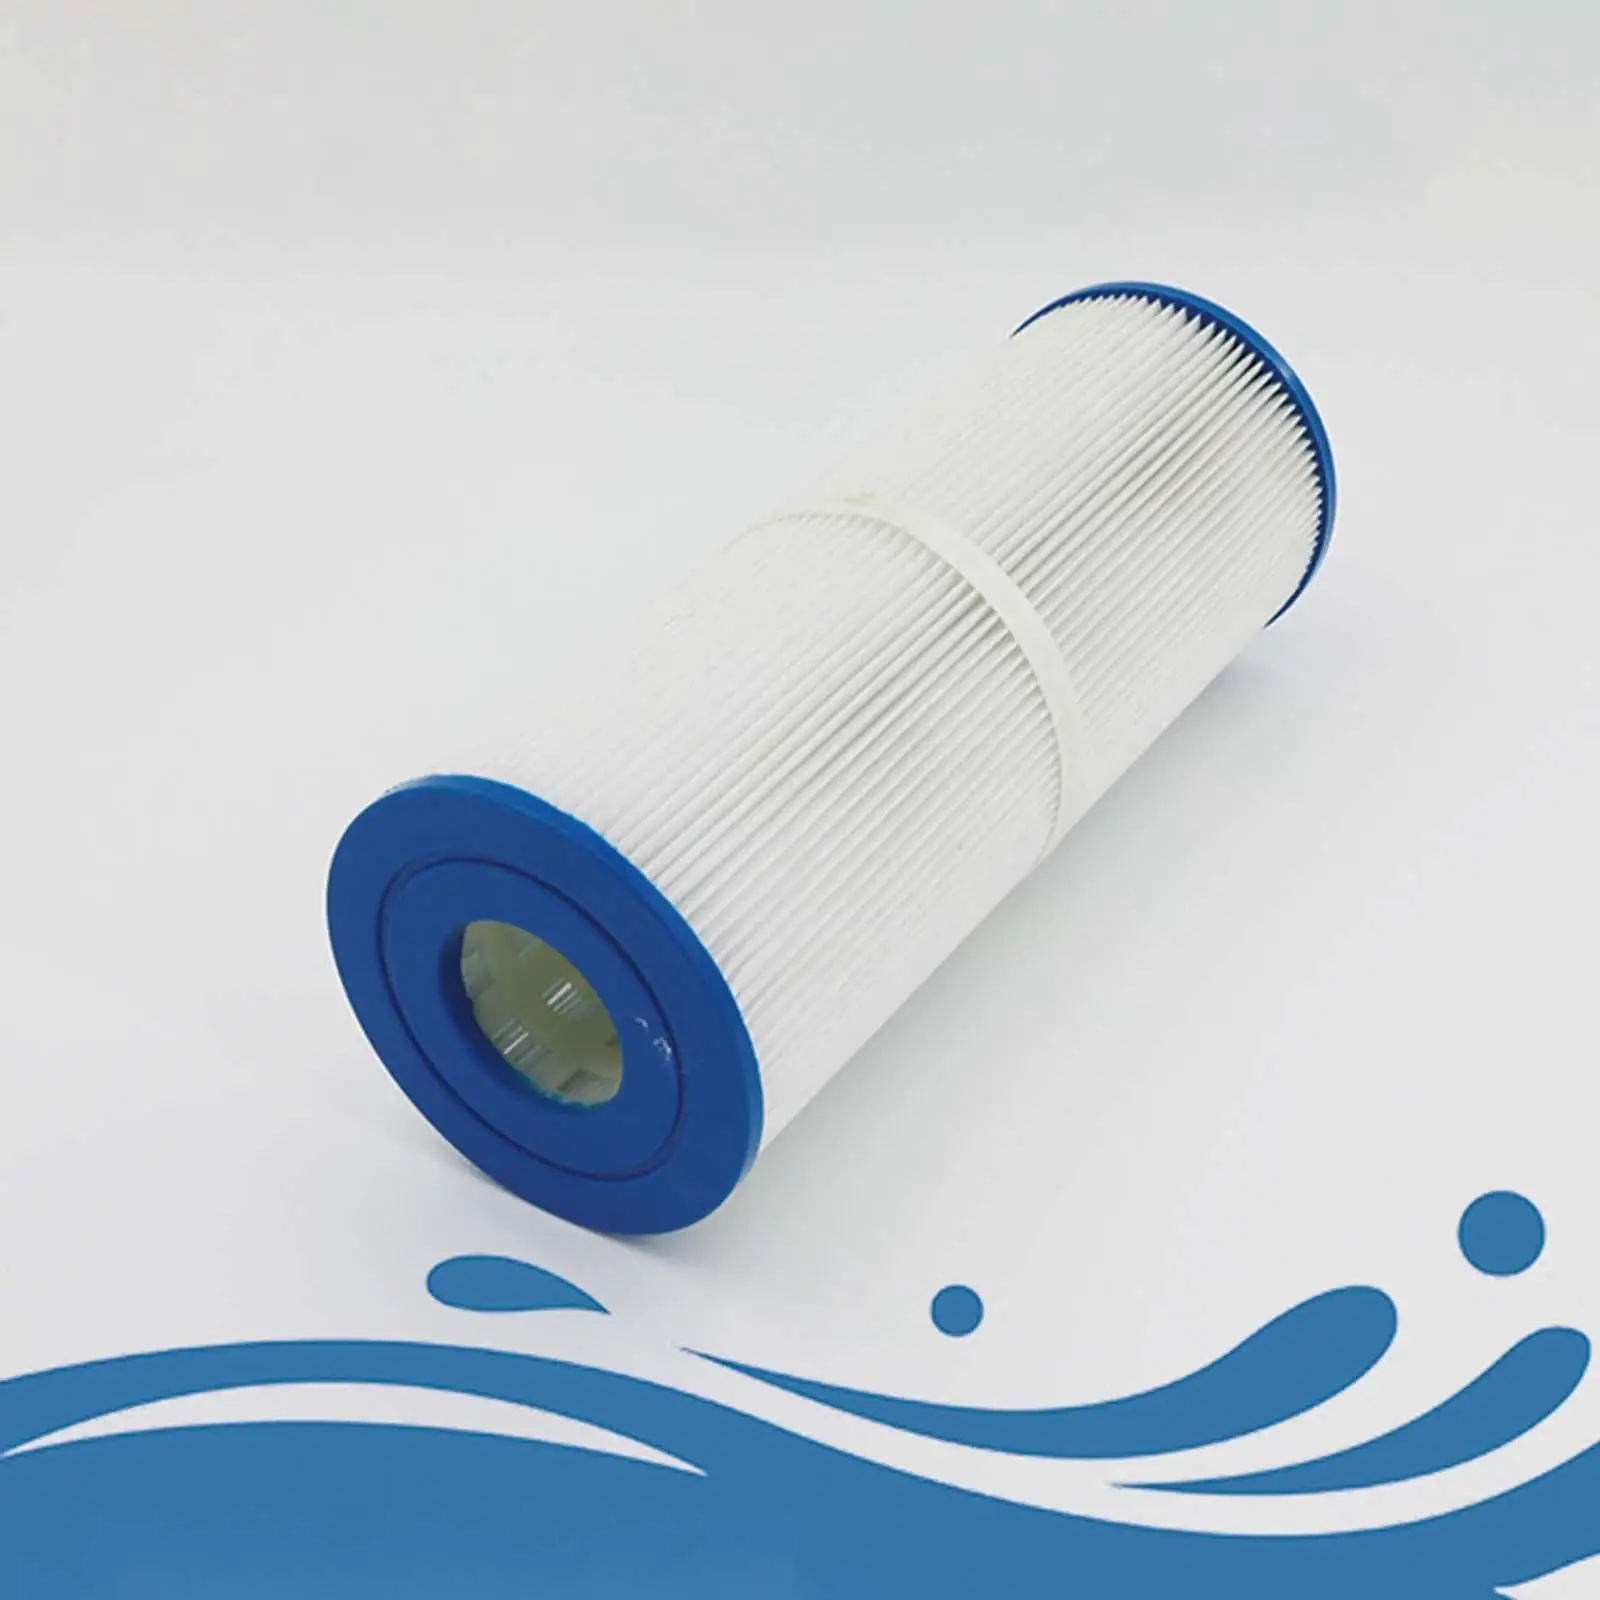 Washable and reusable swimming pool filter pool filter element outdoor hot tub replacement filter folding filter